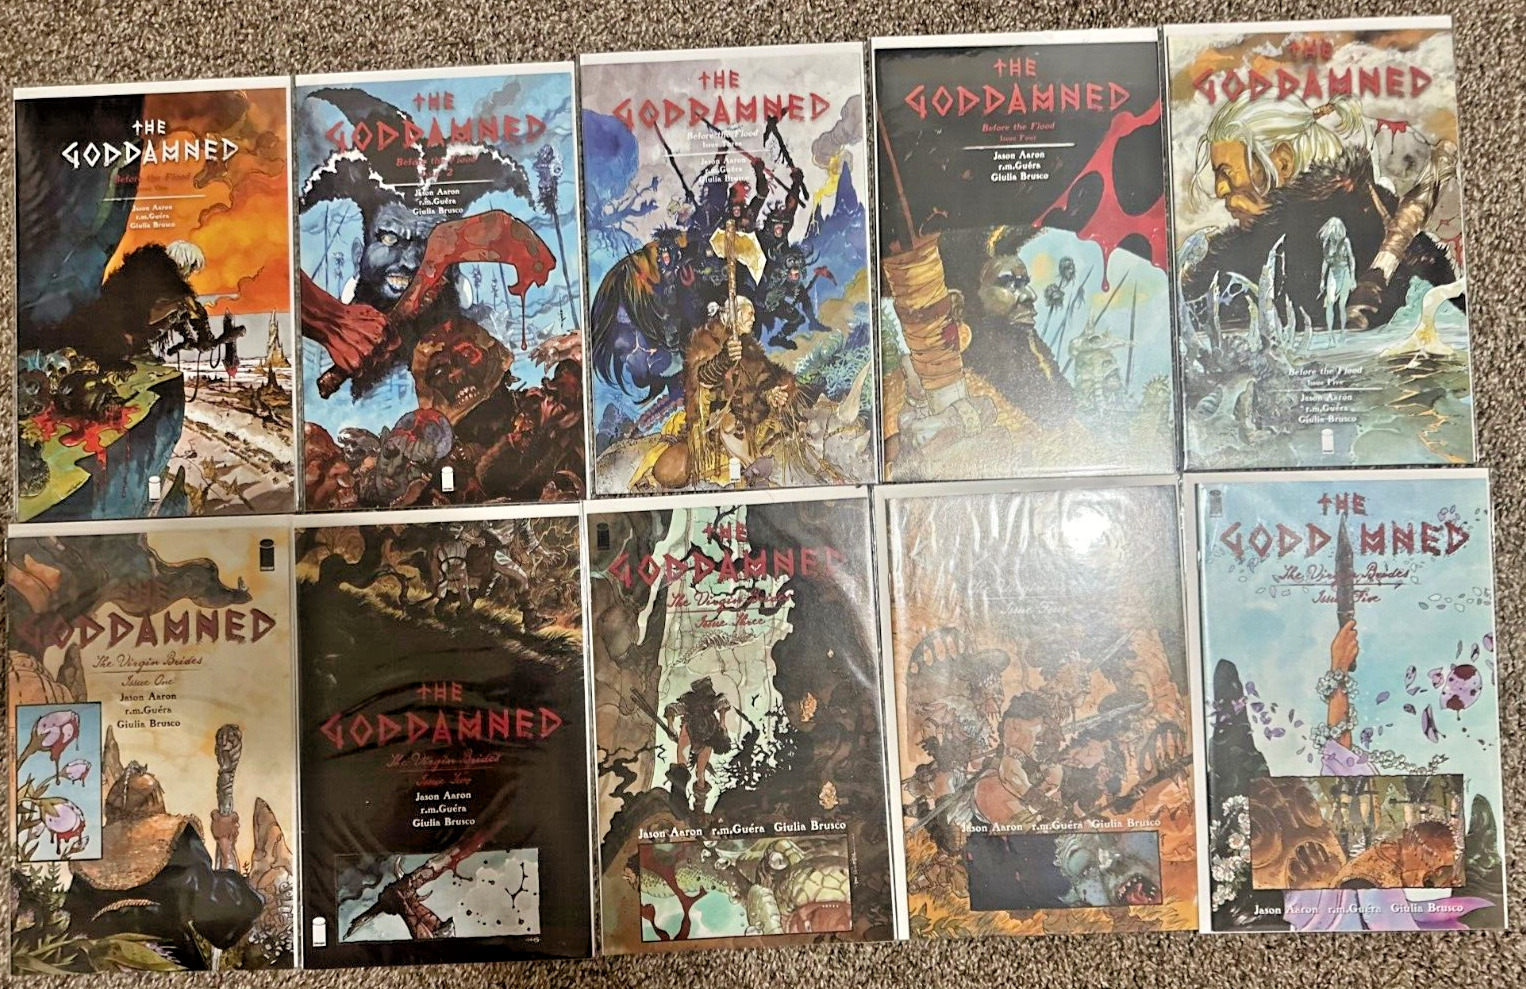 THE GODDAMNED by Jason Aaron The Flood # 1-5 & Virgin Brides # 1-5 Image Comics